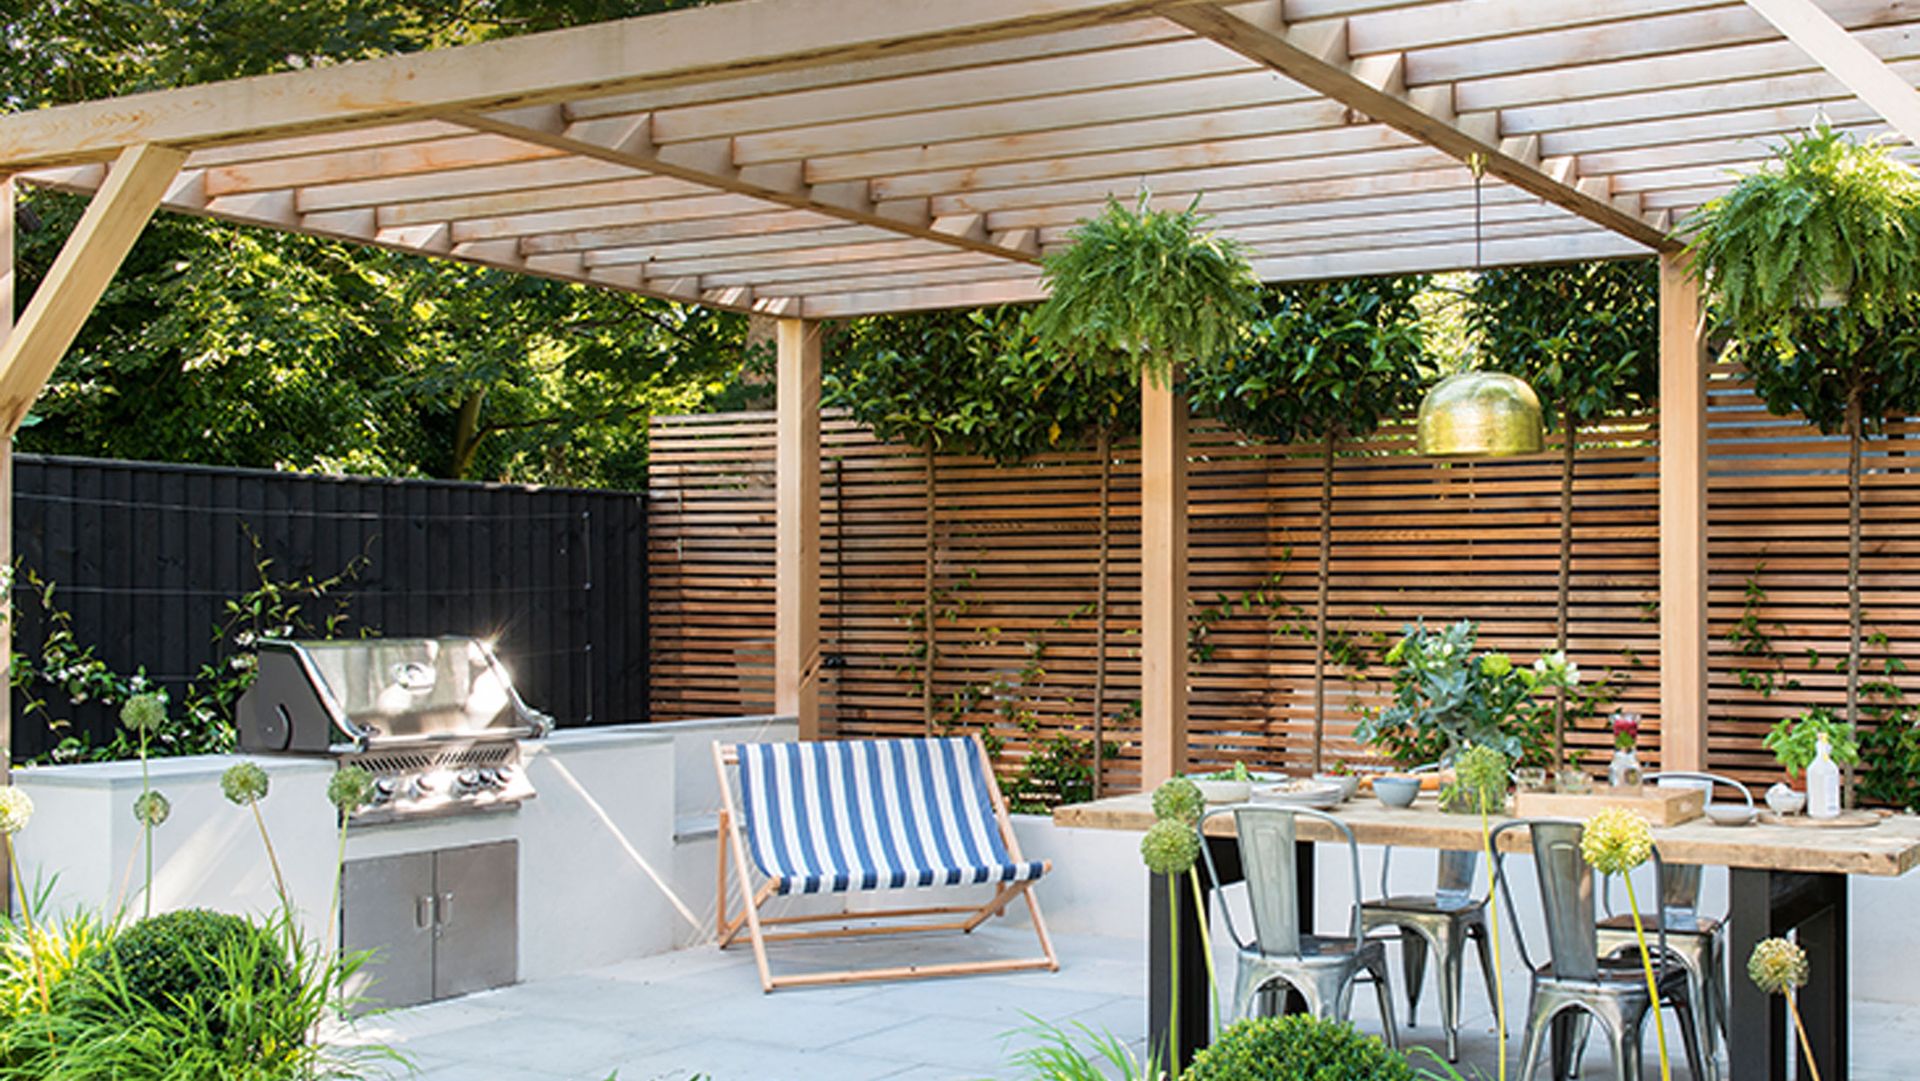 Pergola ideas - 12 gorgeous garden structures to add style and shade ...